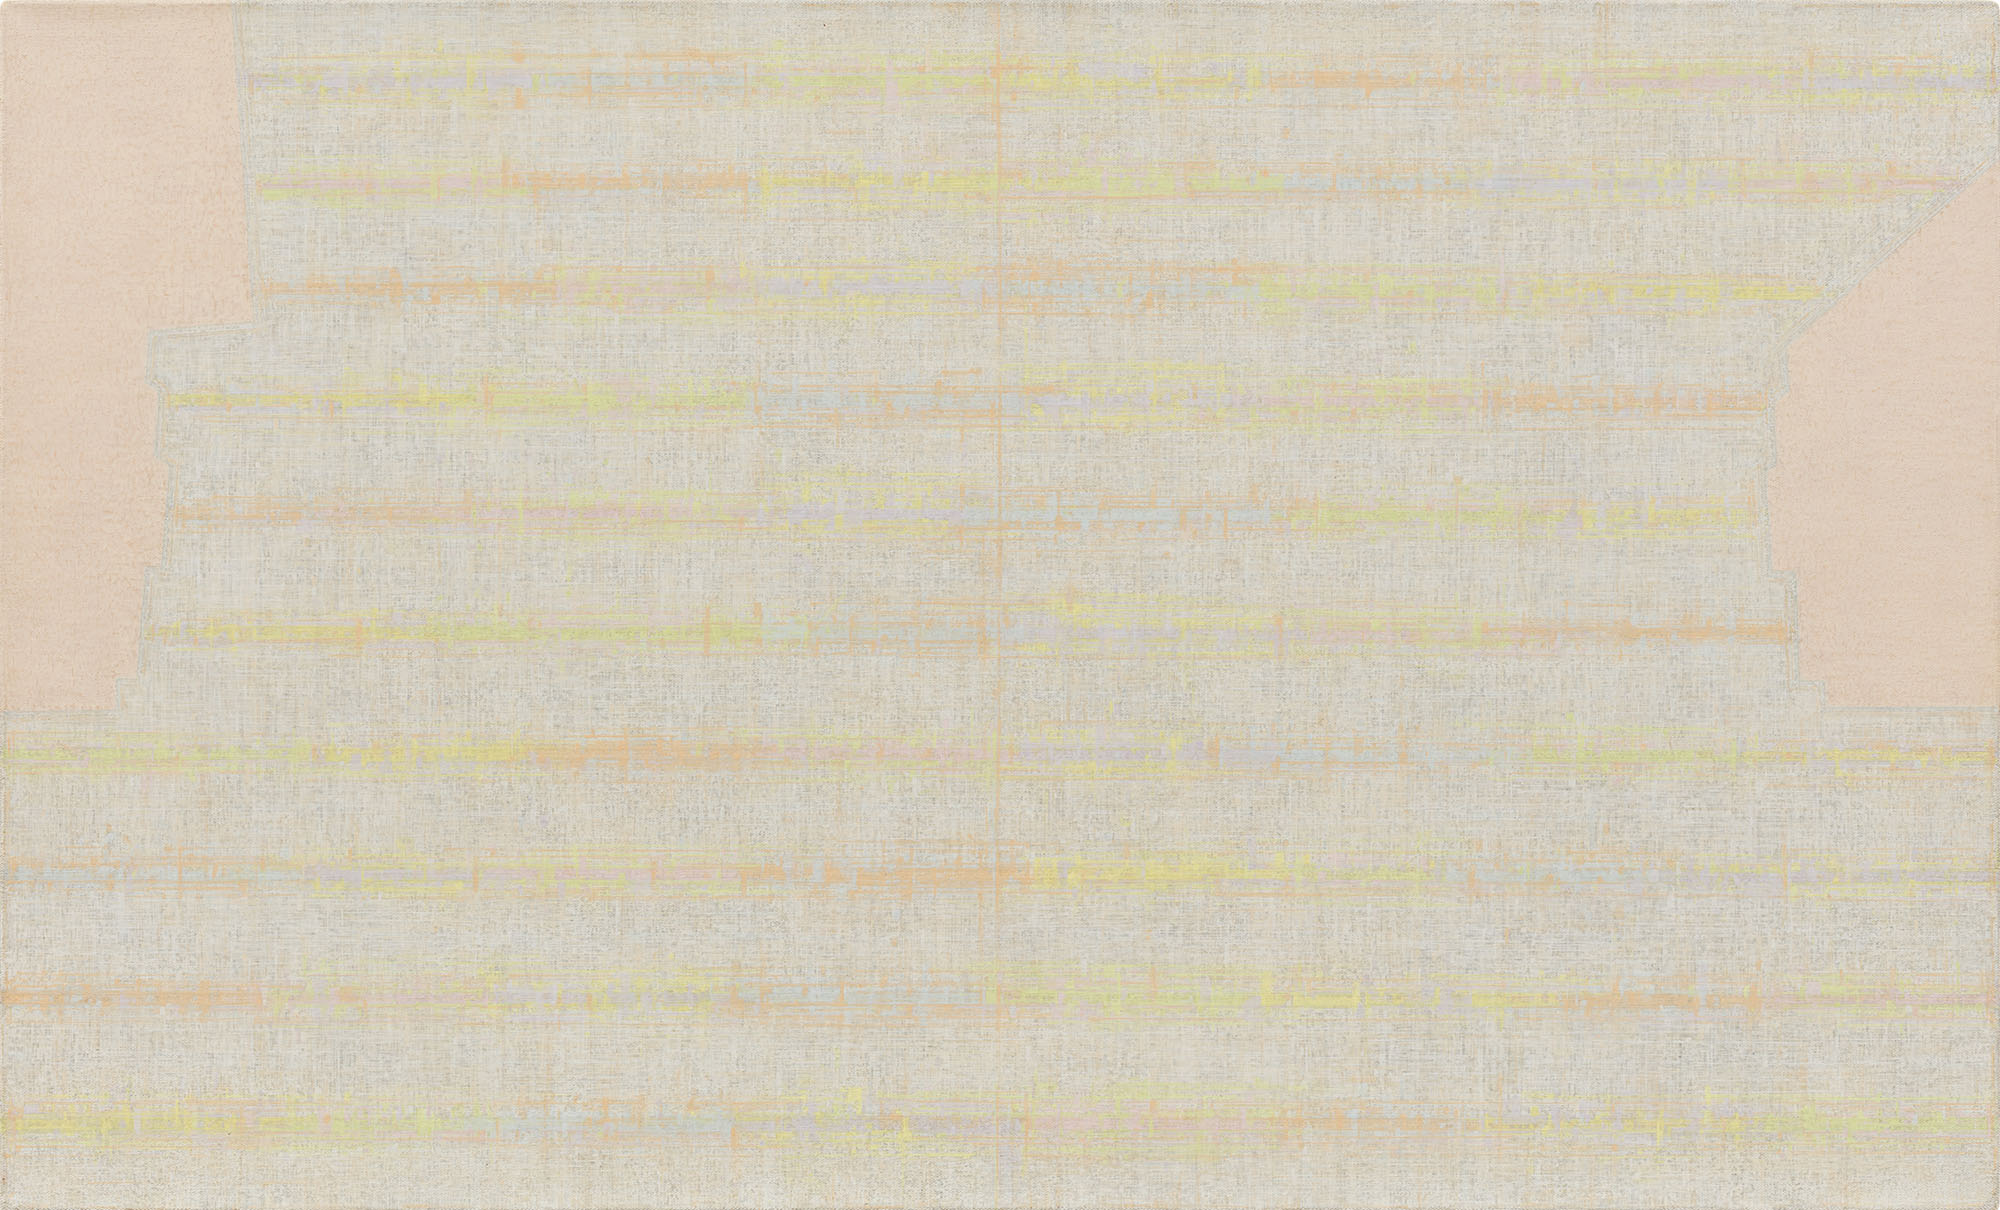 Julia Fish, Threshold, SouthEast – Two [ spectrum : orange with grey ], 2010–14. Oil on canvas. Collection of DePaul Art Museum, Museum purchase and restricted gift of Dia S. Weil and Edward S. Weil, Jr., Melissa Weber and Jay Dandy, and Scott J. Hunter, 2019.11. Photo: Tom Van Eynde